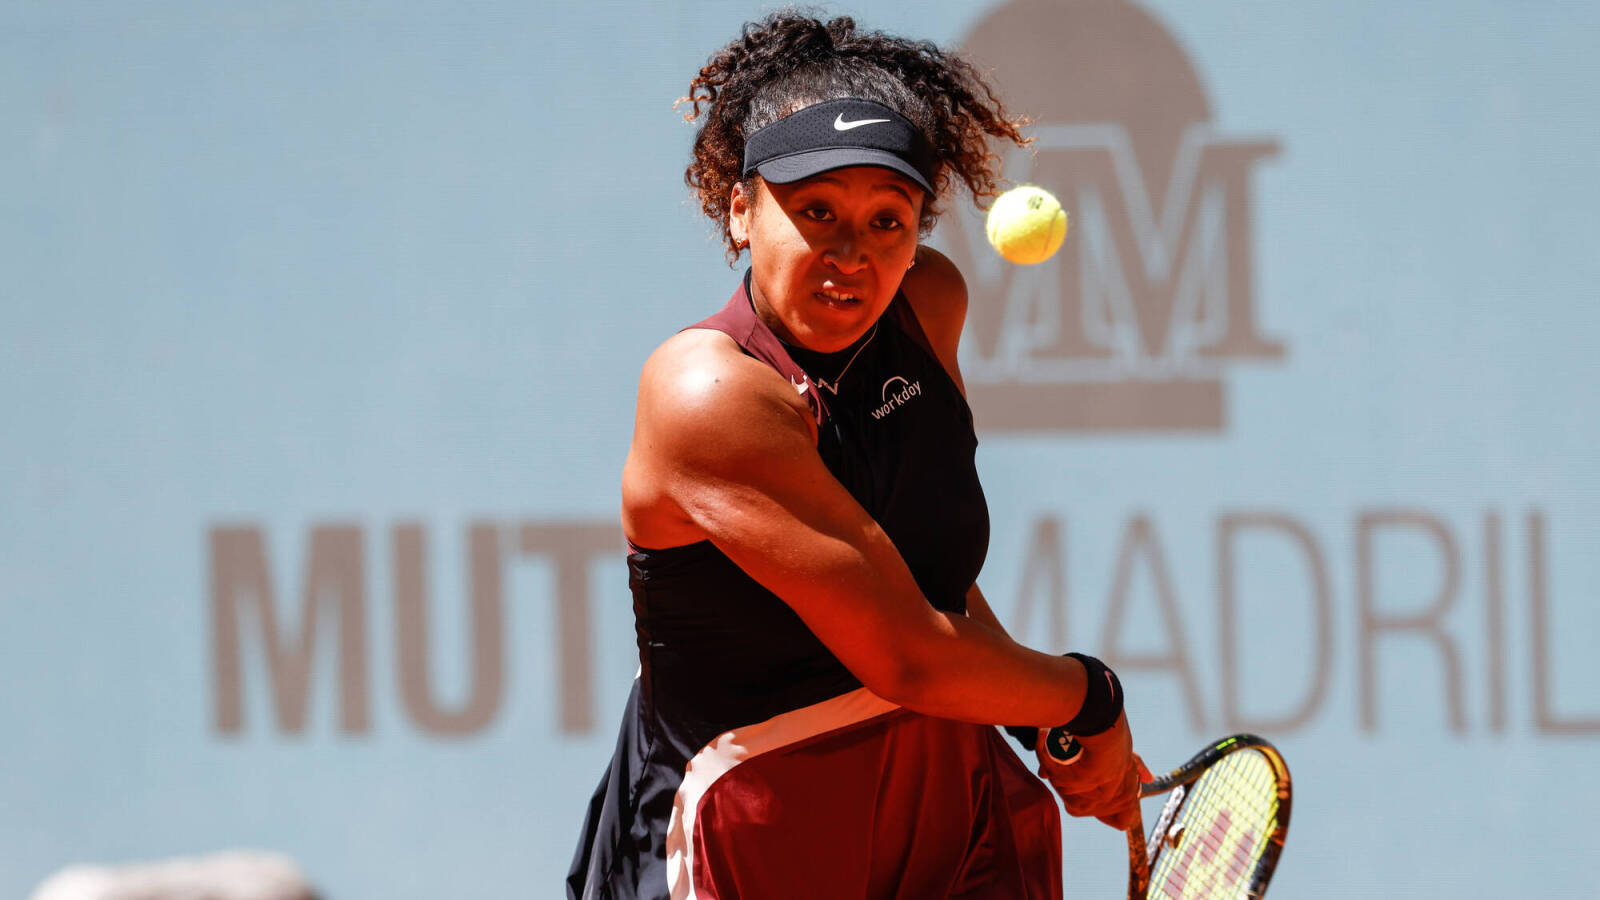 Naomi Osaka, who withdrew from French Open due to mental health issues, is now ’embracing’ playing on clay after solid win in Madrid